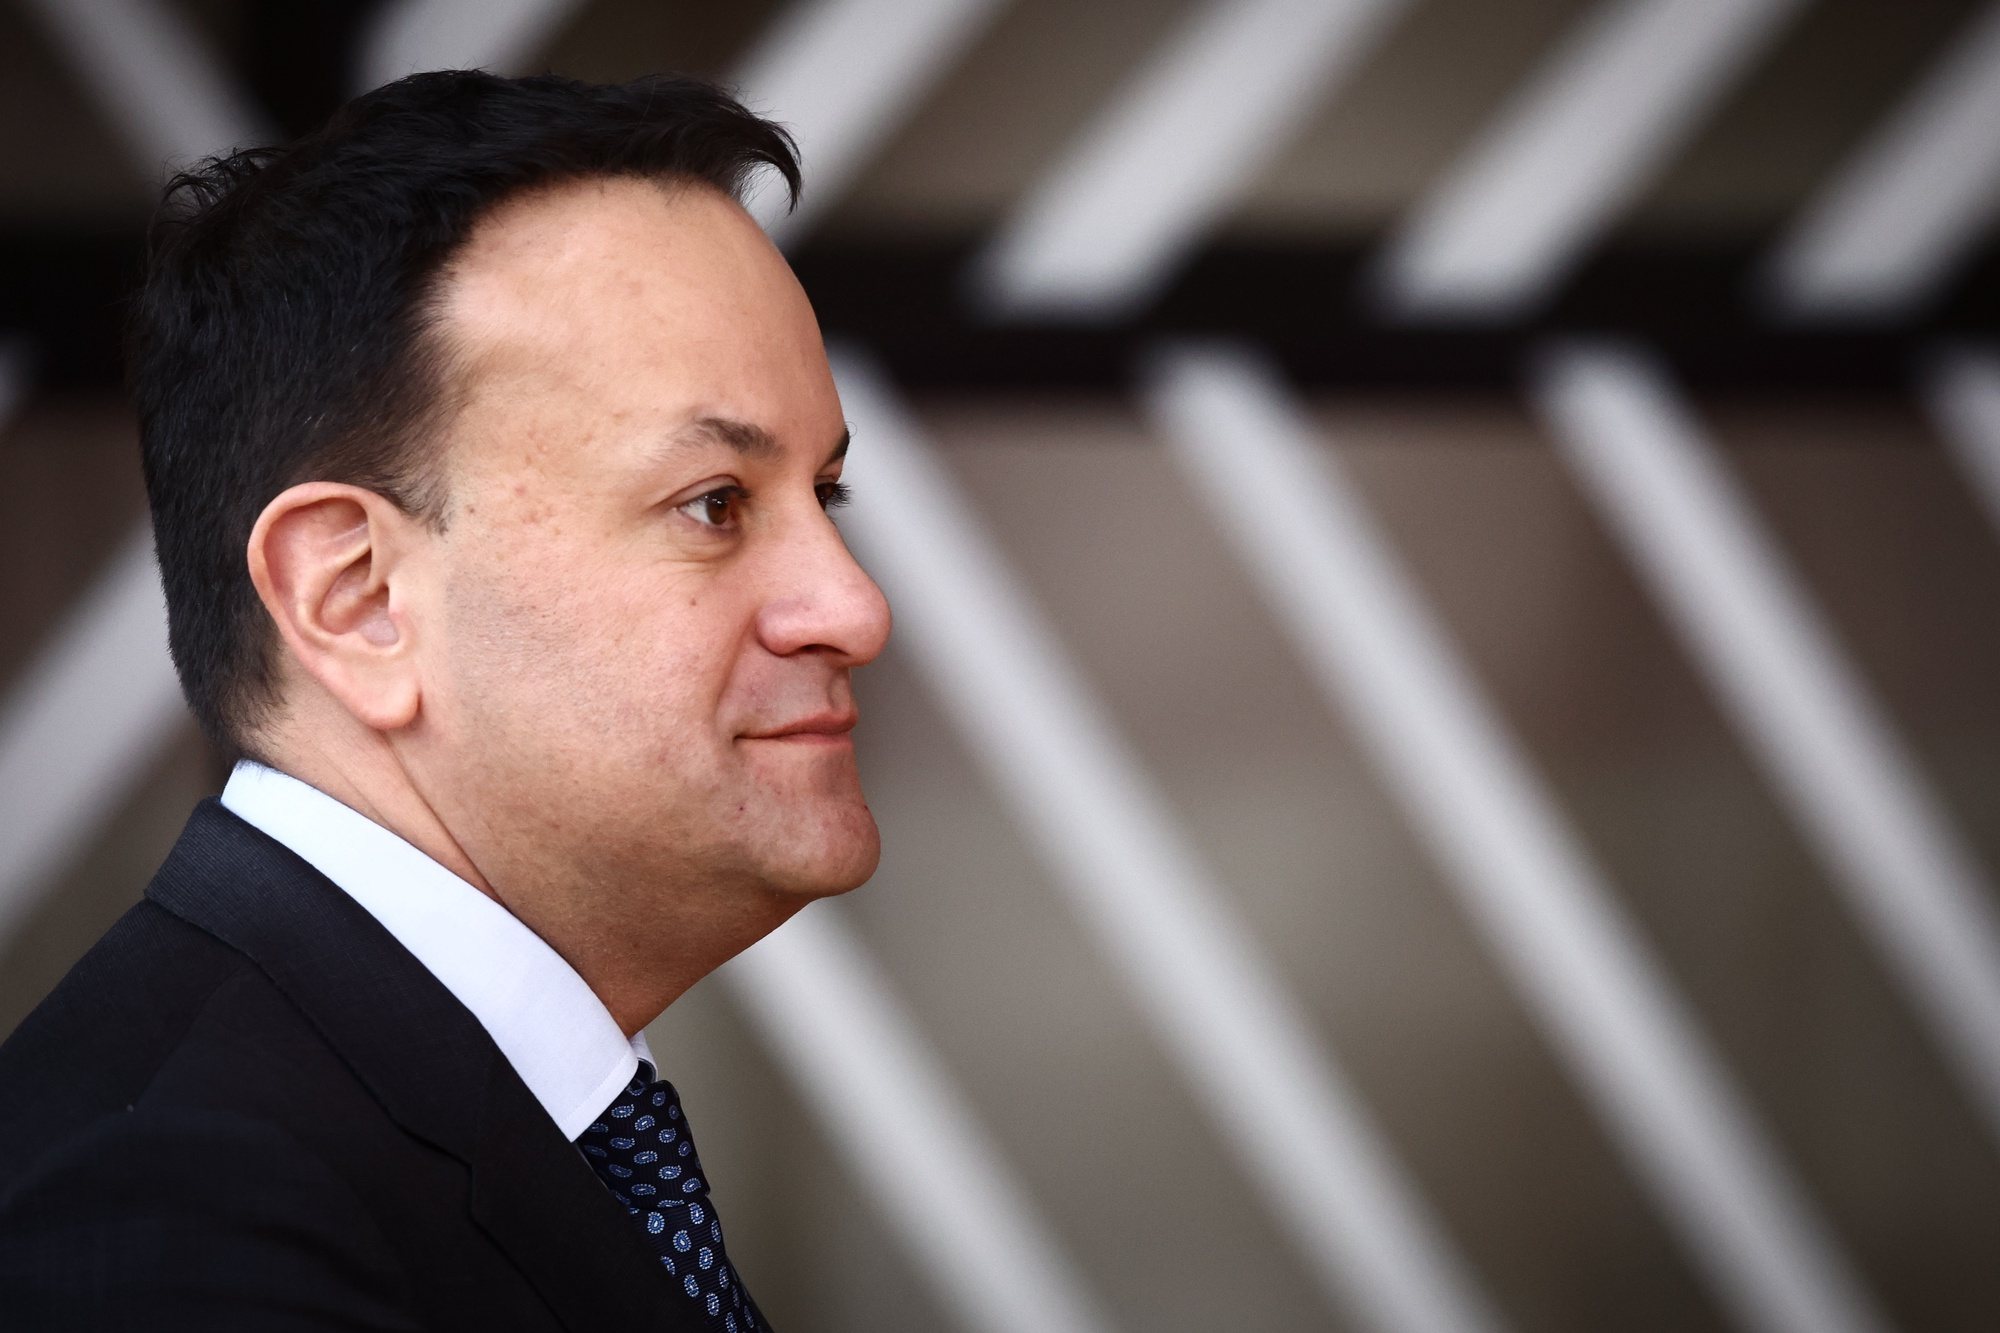 epa11231103 (FILE) - Ireland&#039;s Prime Minister (Taoiseach) Leo Varadkar arrives for the second day of an EU Summit in Brussels, Belgium, 24 March 2023 (reissued 20 March 2024). Varadkar on 20 March 2024 announced his immediate resignation from the post of leader of the Fine Gael party, as well as his resignation from the position of Taoiseach, adding he will step down &#039;as soon as a successor is able to take up that office&#039;.  EPA/STEPHANIE LECOCQ